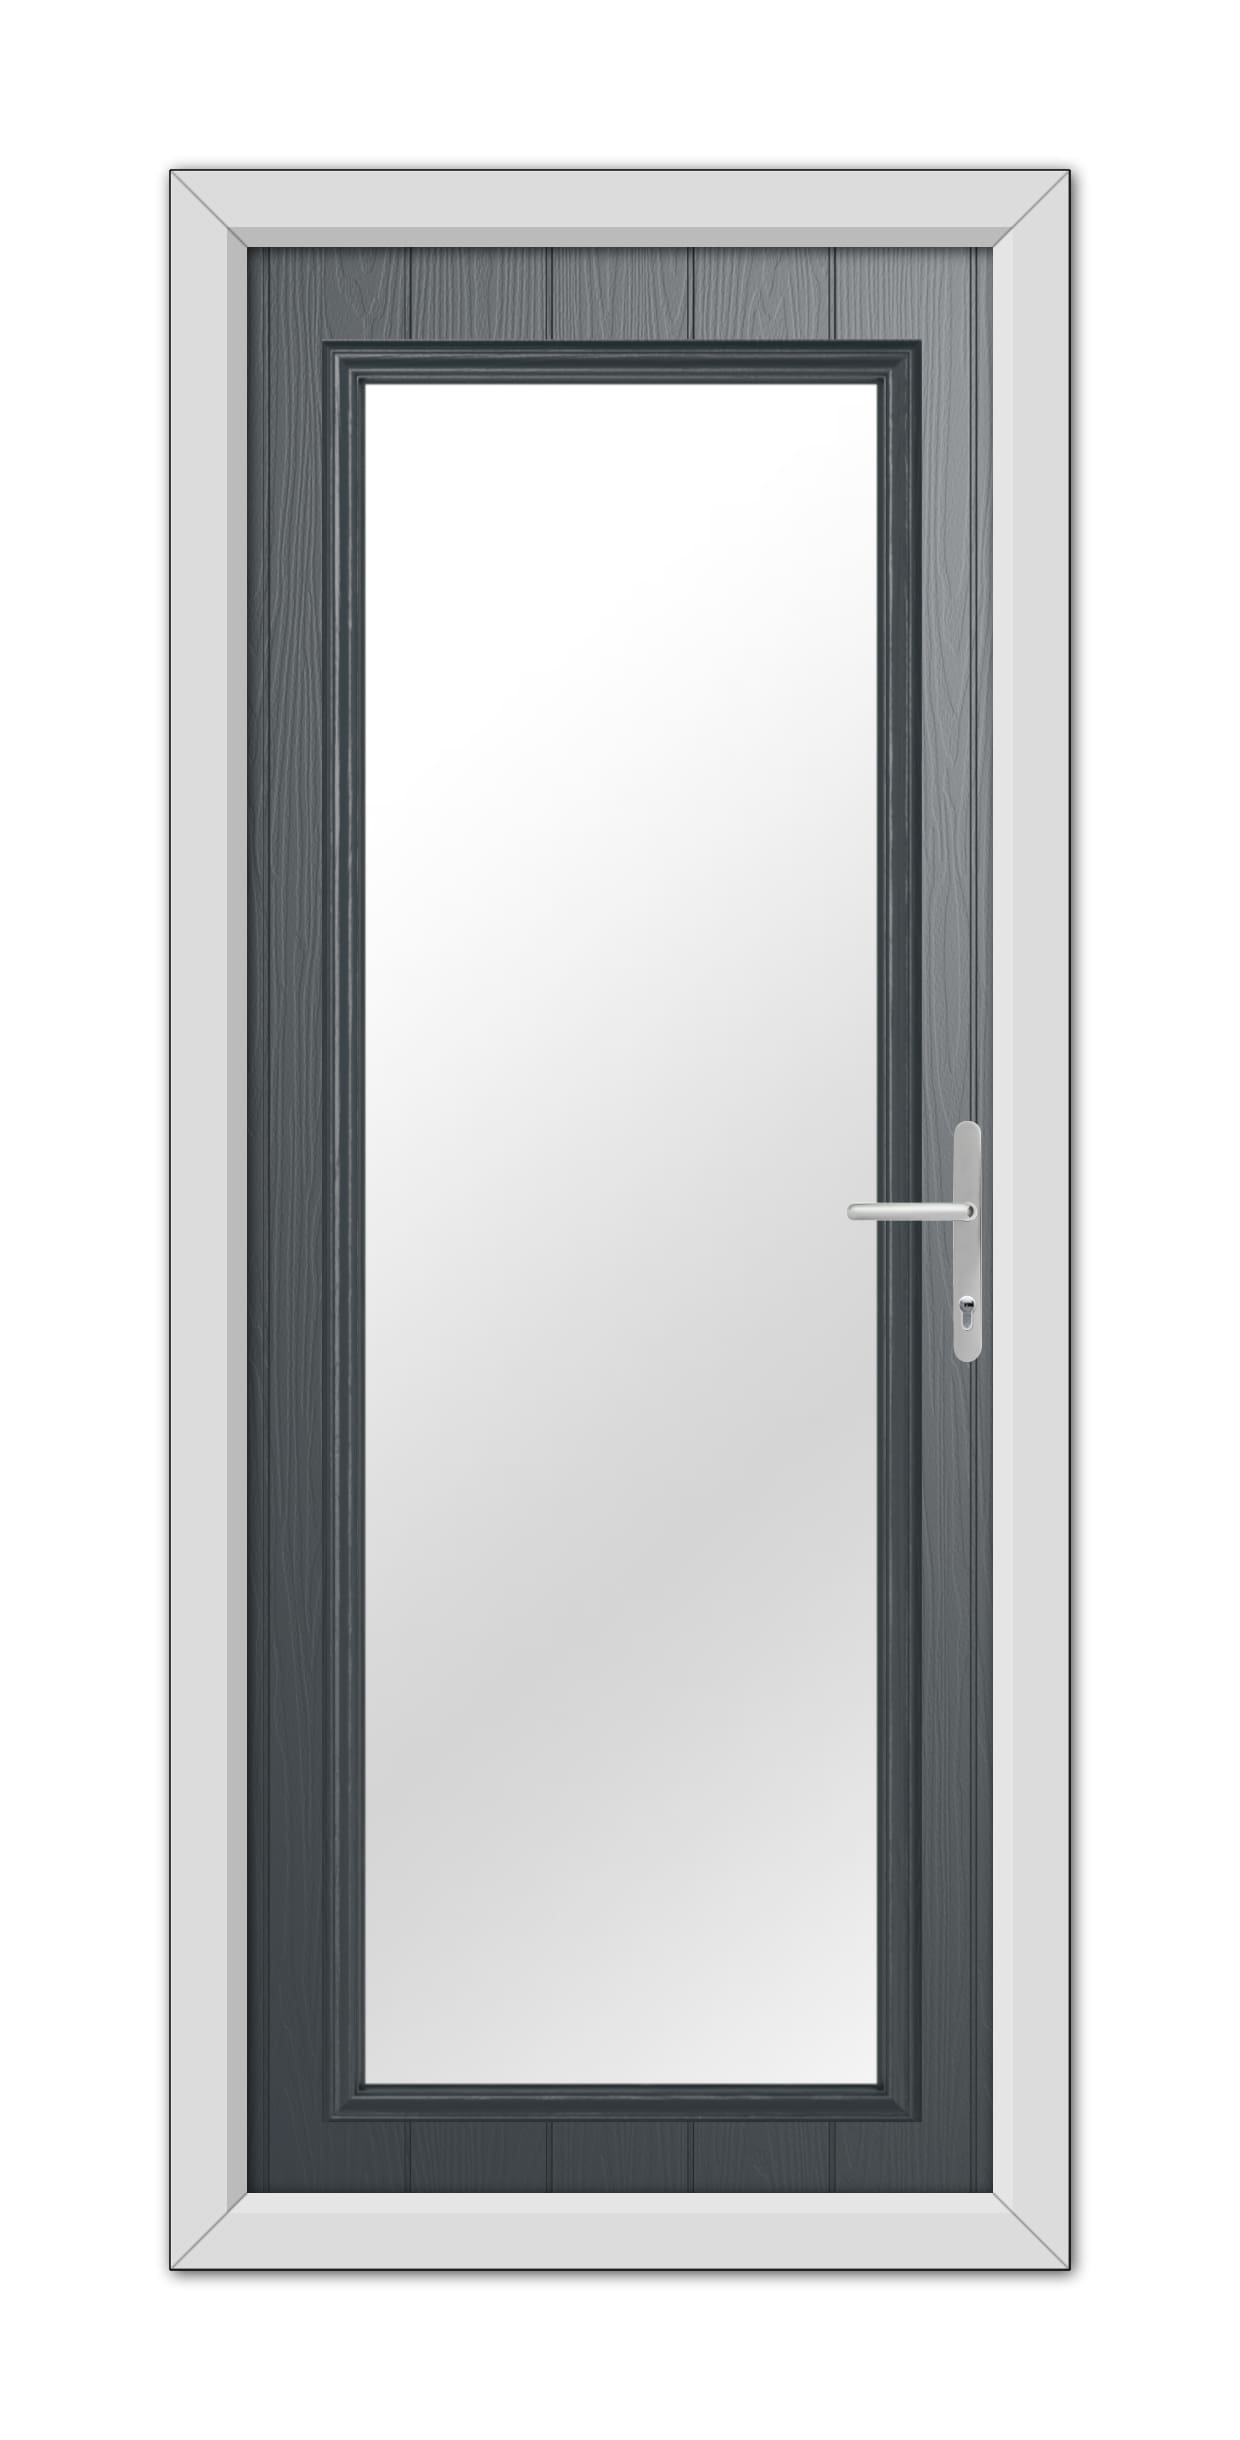 A modern Anthracite Grey Hatton Composite Door 48mm Timber Core with a reflective glass pane and a silver handle, surrounded by a white frame.